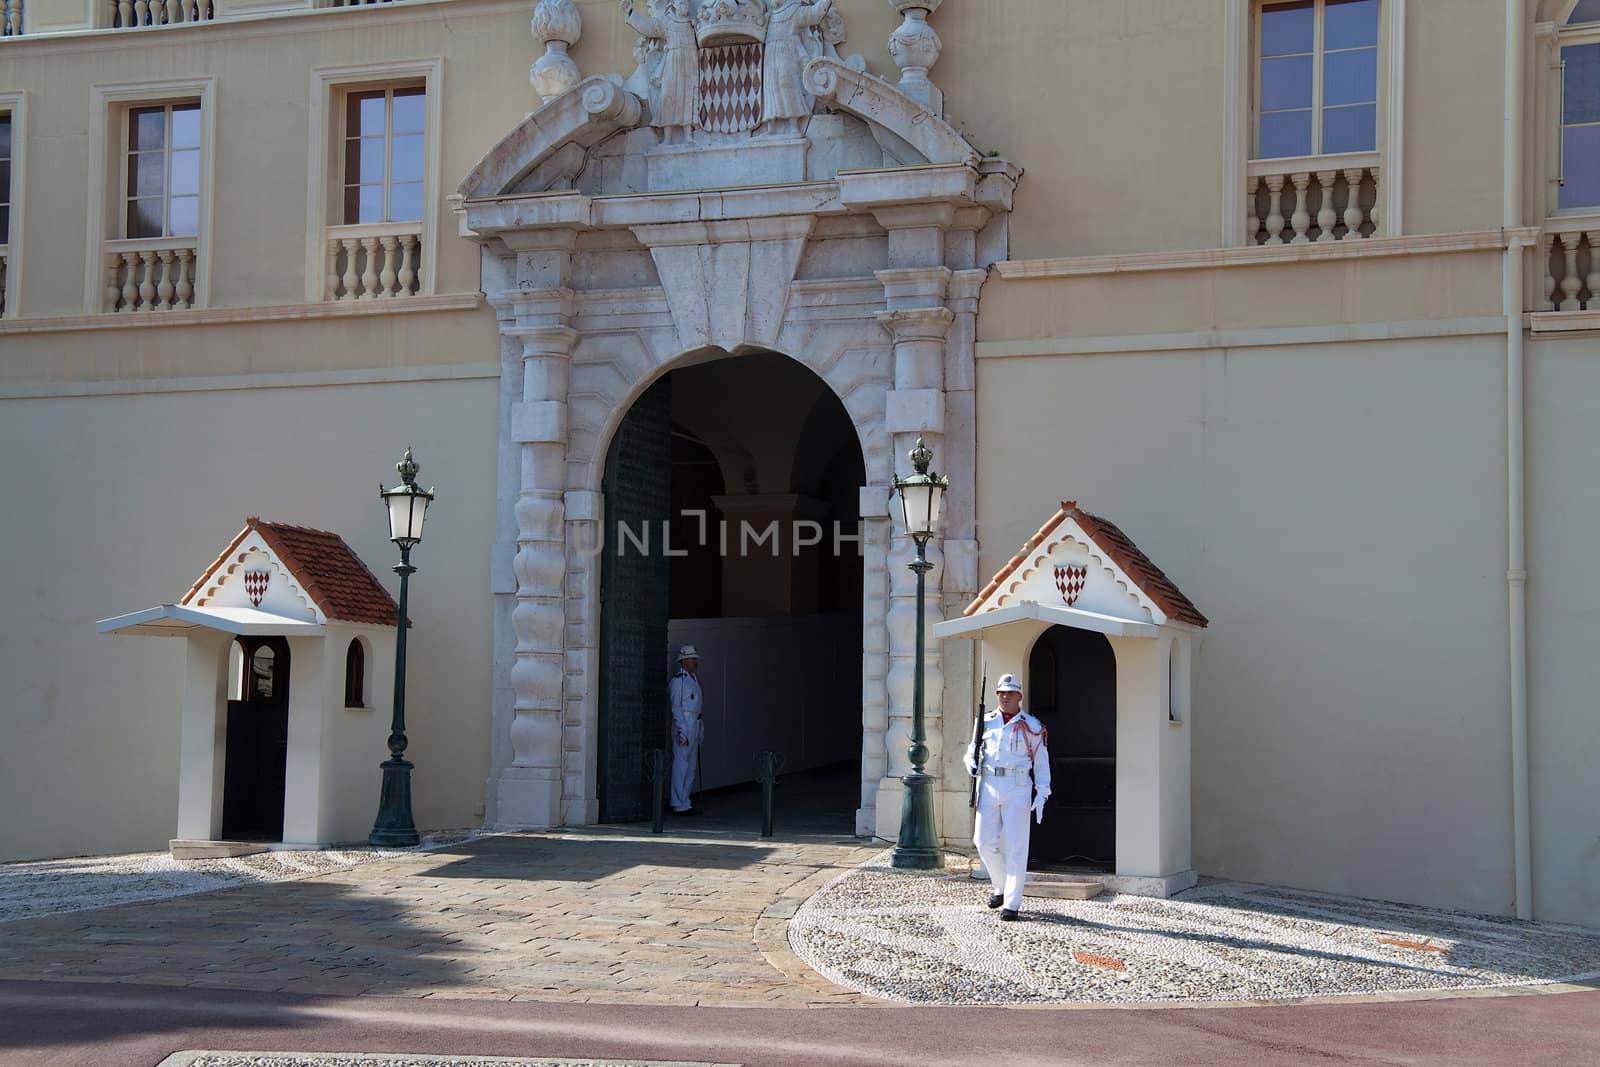 October 1st, 2009 - La Condamine distric, Monaco - The palace guards standing at attention at the main entrance.